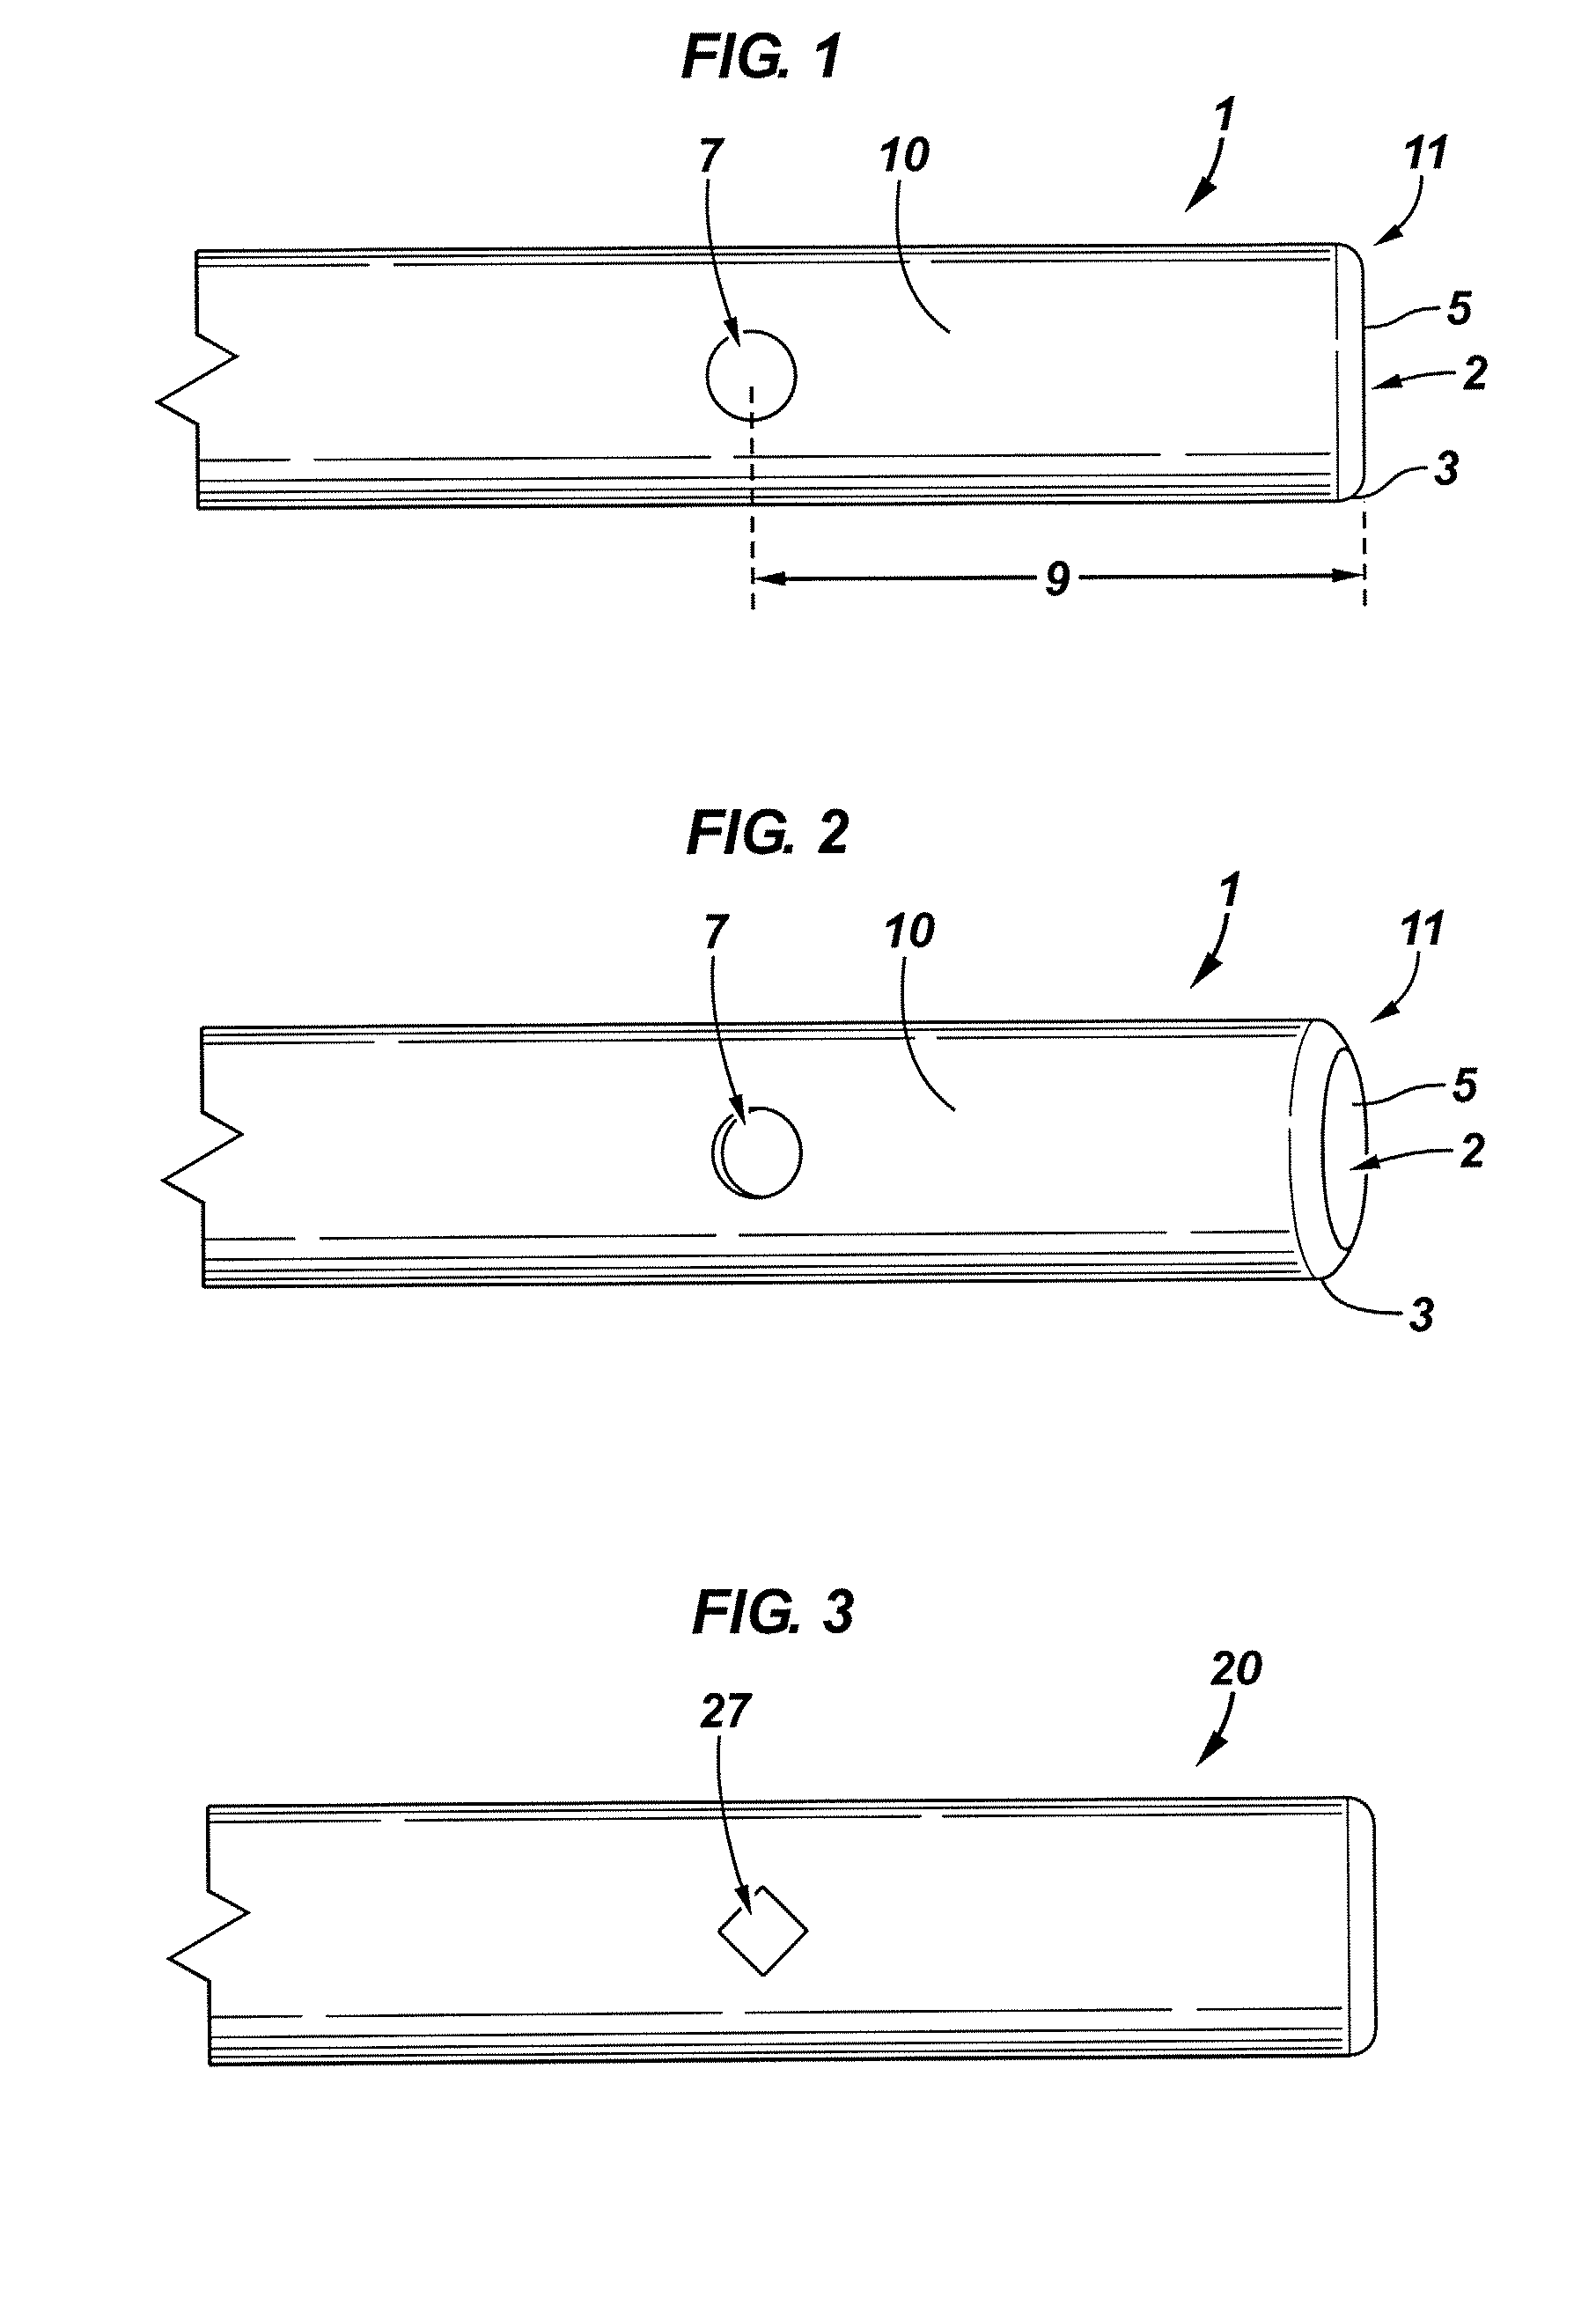 Neural injection system and related methods